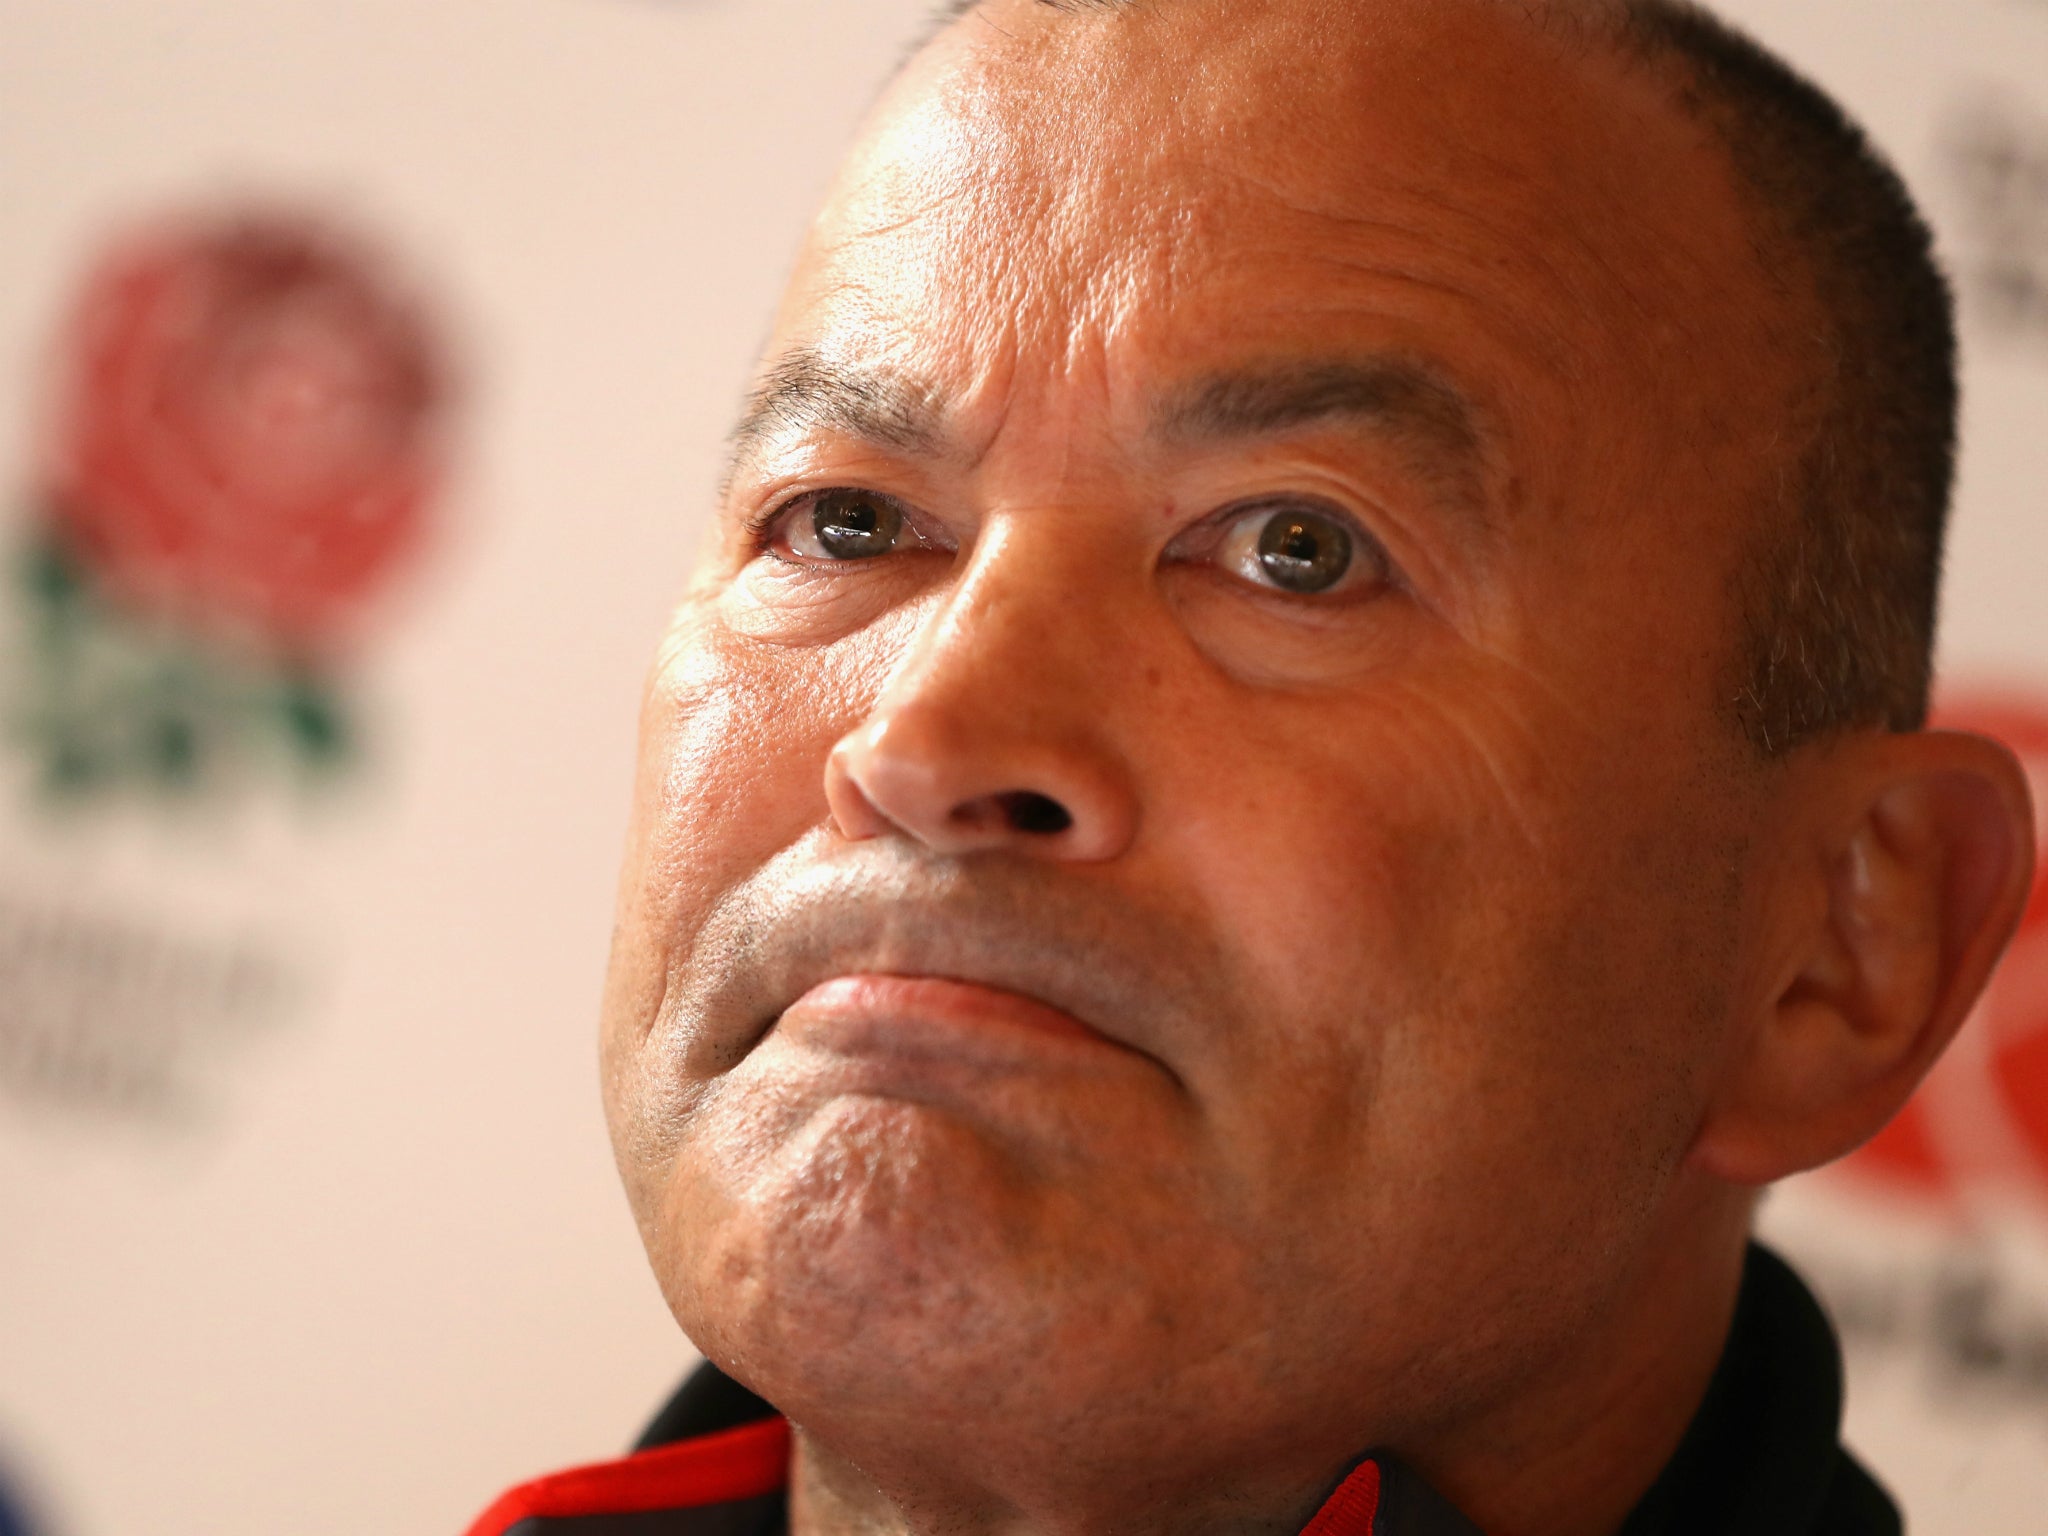 Eddie Jones believes Rhys Patchell will face more pressure than he has done in his international career so far